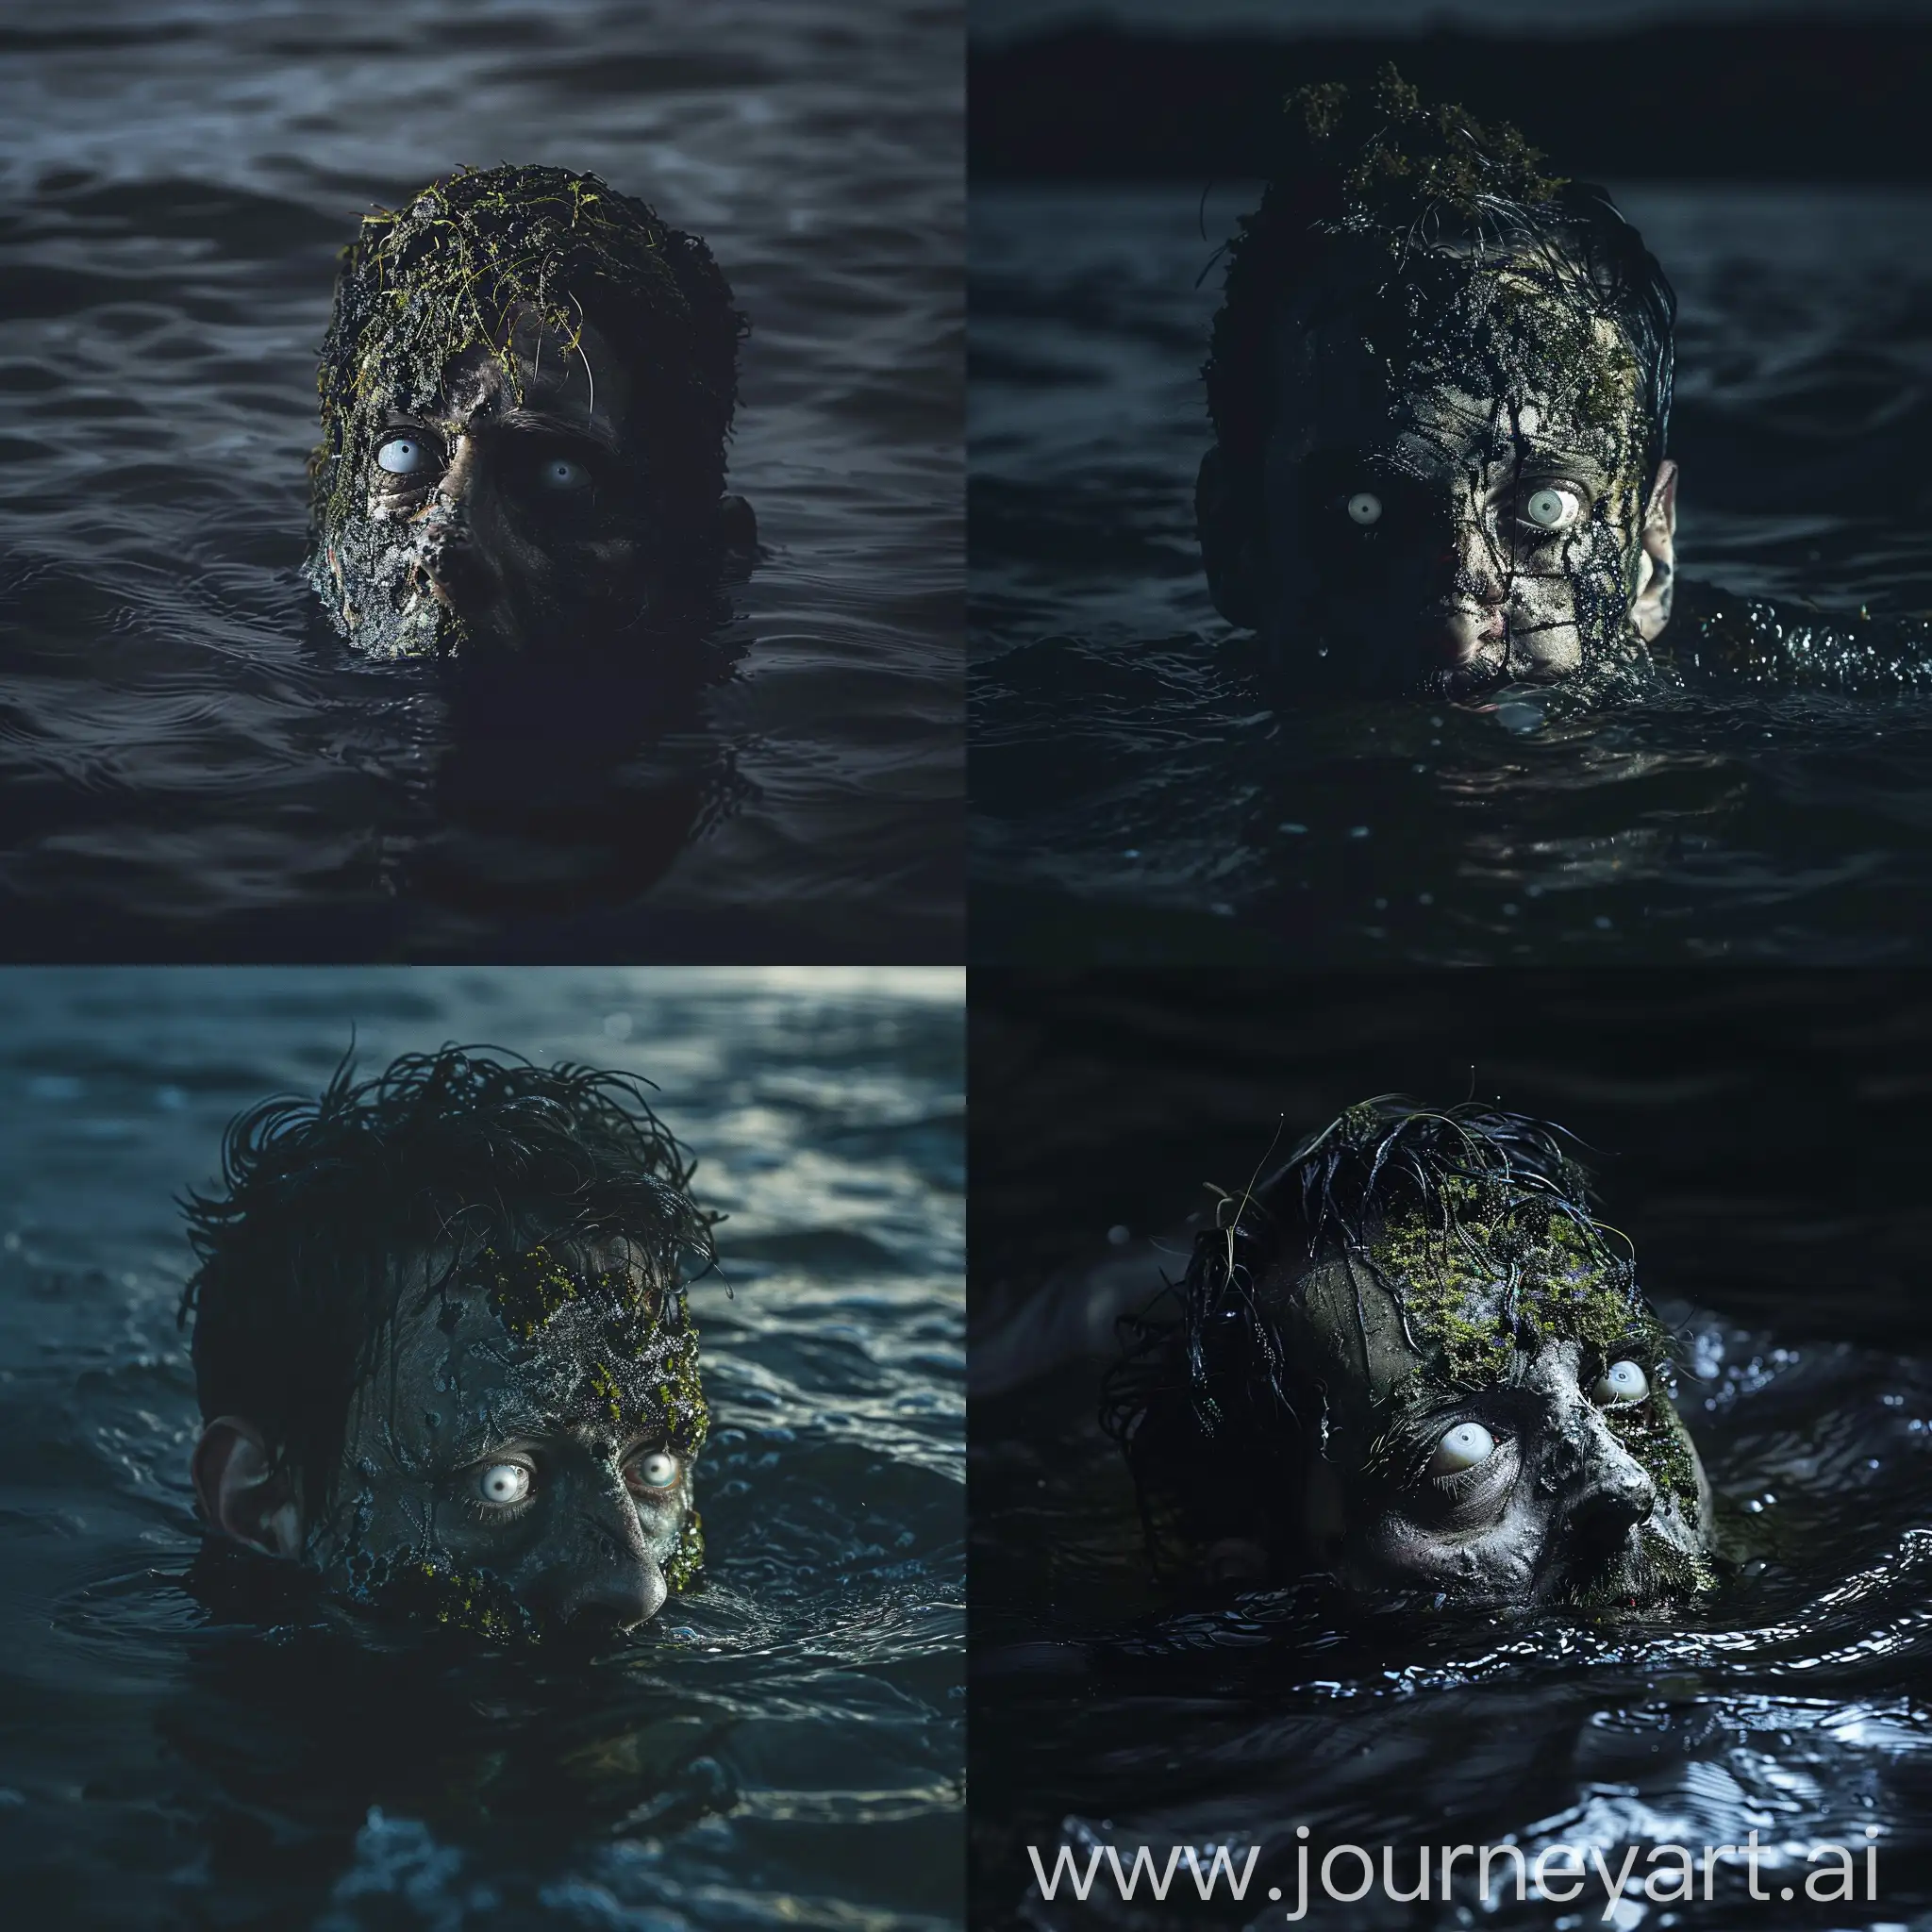 A man took his head out of dark ocean, his face is rotten, moss over his face, white eyeballs, wet hair, midnight, dark eerie, creepy, shadows contrast, cinematic lighting